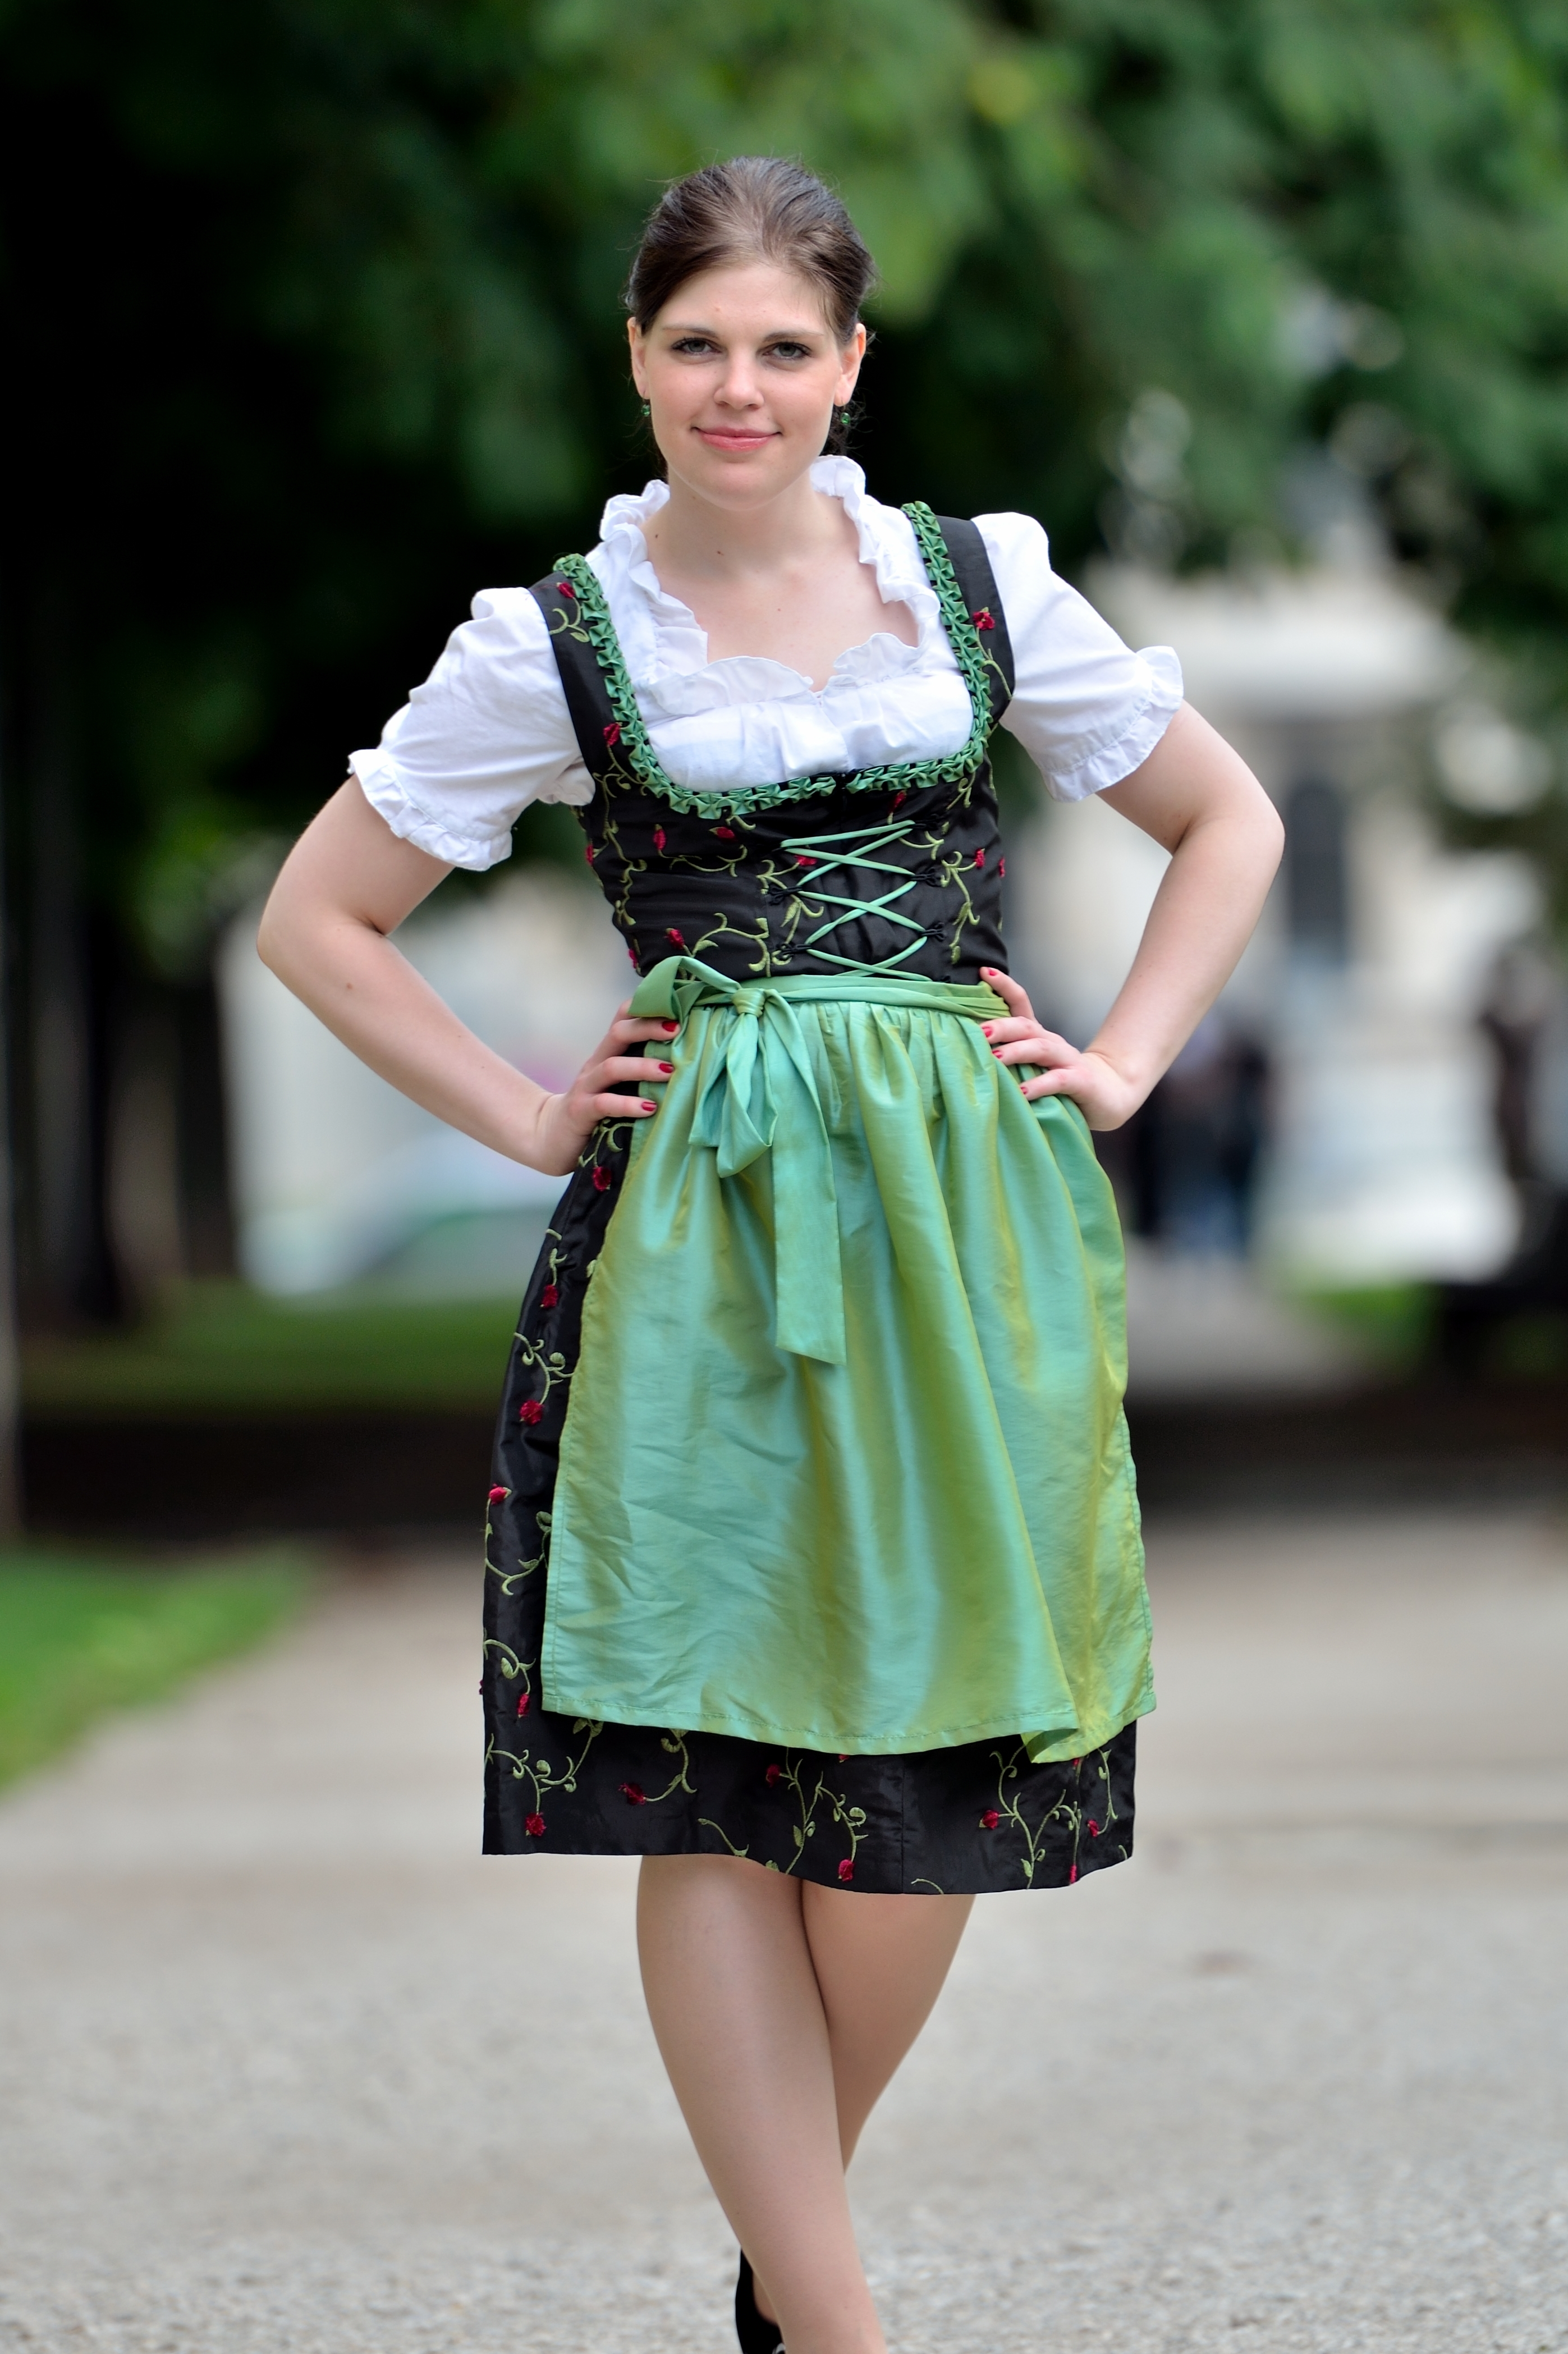 On the picture is a woman. The woman is wearing a Dirndl Dress with apron and Dirndl blouse.